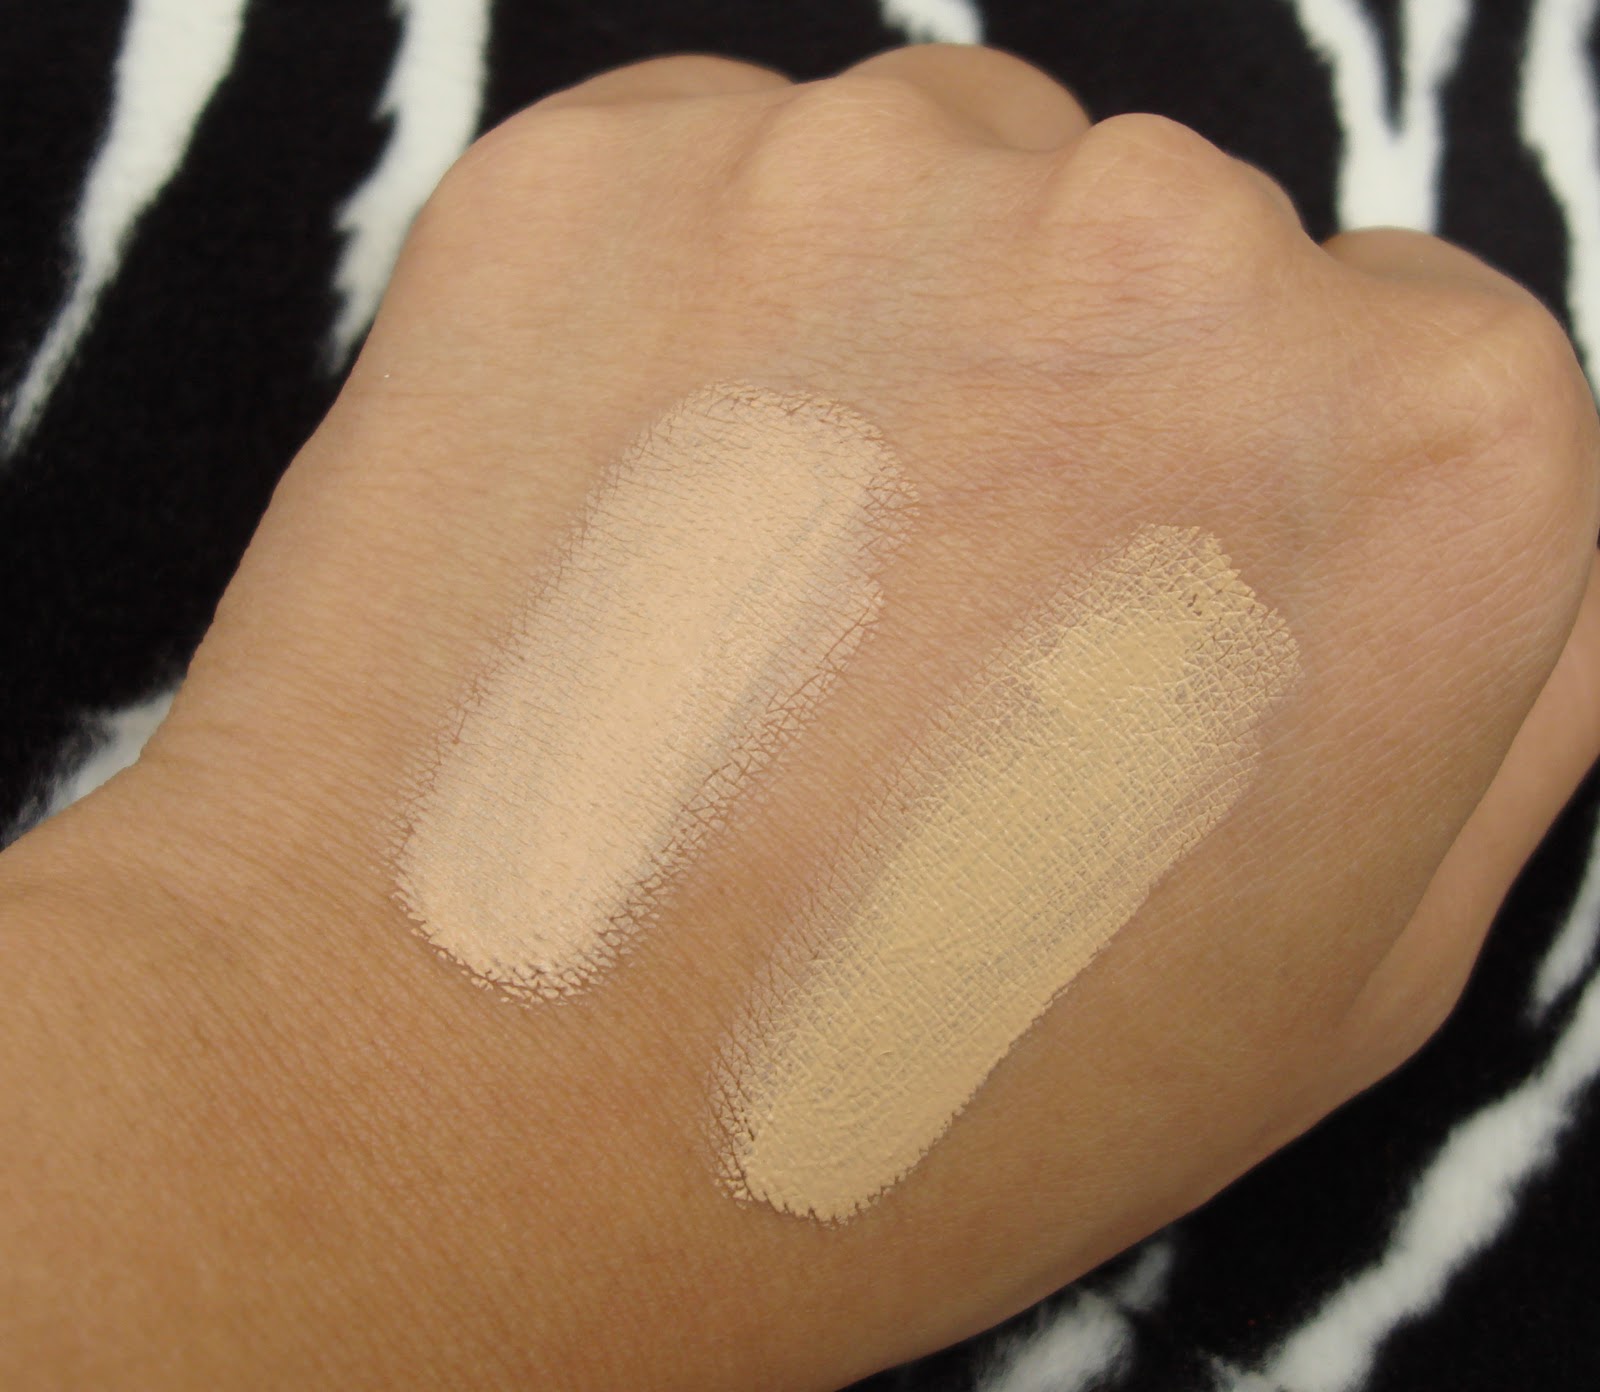 Get Gawjus: Current Concealer routine + Dermablend review